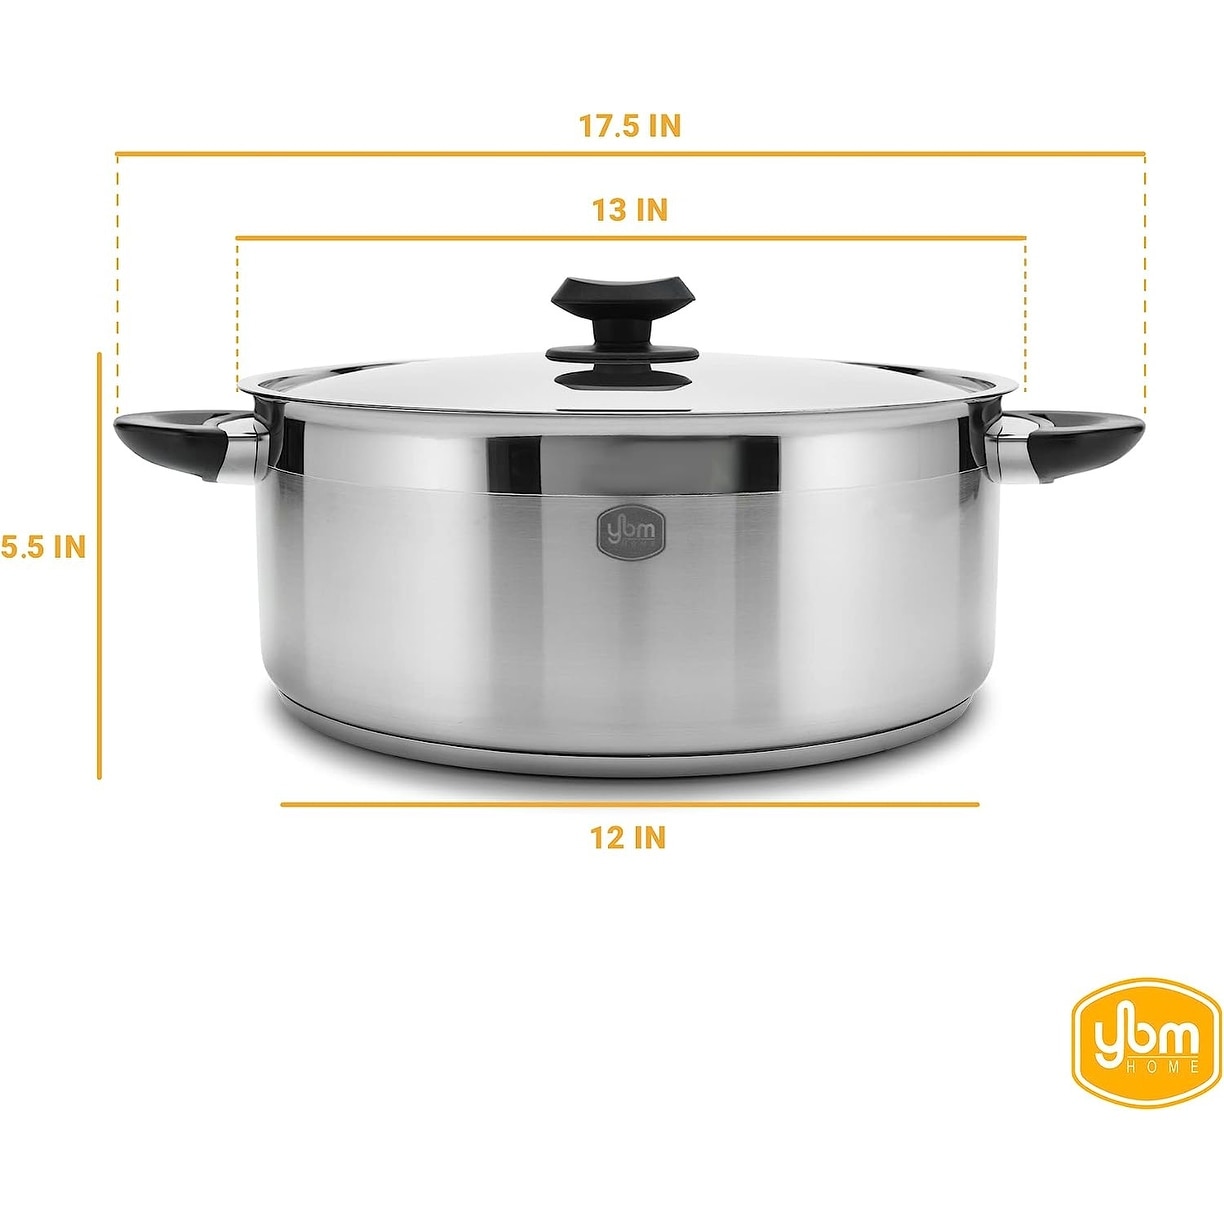 Hascevher Classic 18/10 Stainless Steel StockPot Covered Cookware Induction  Compatible Oven Safe 11 Quart 